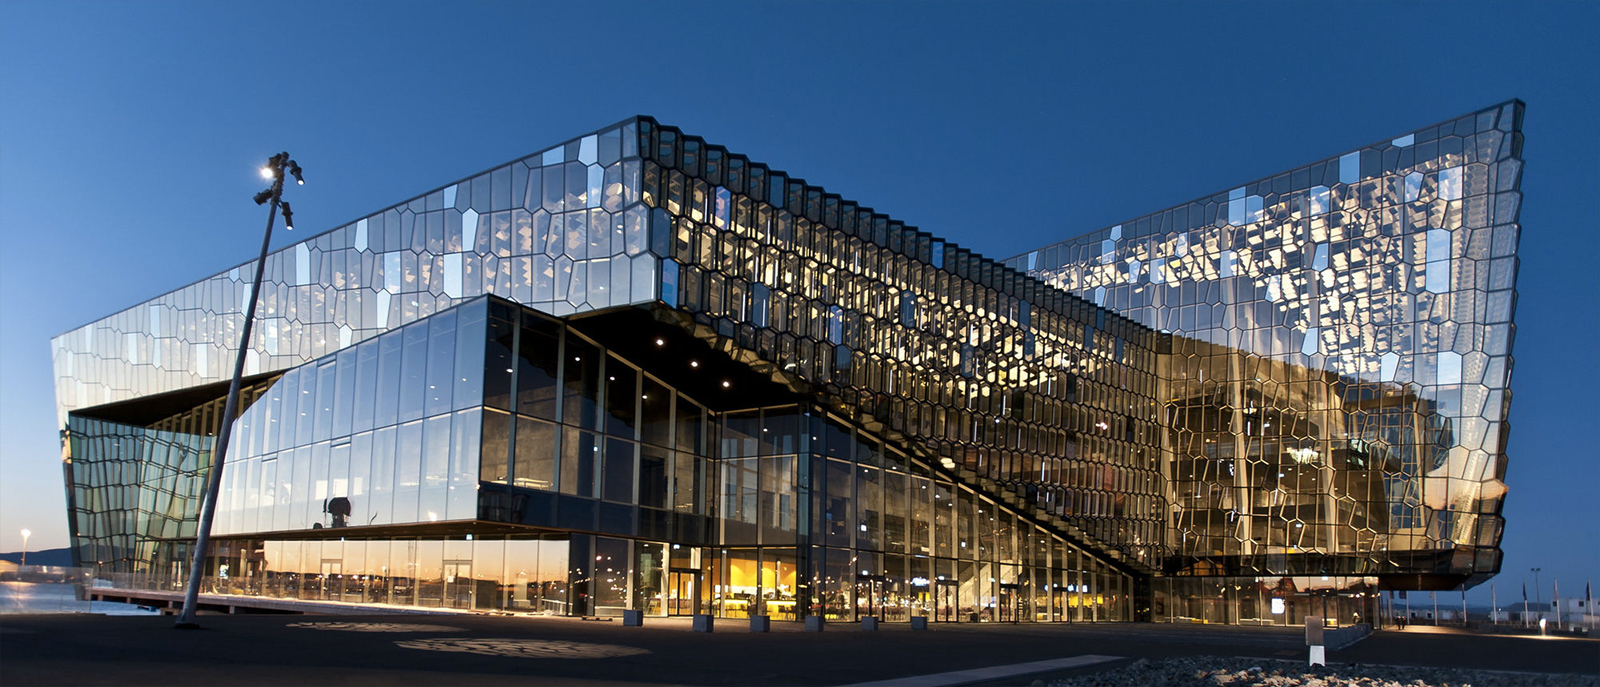 Photography: courtesy of Harpa Music Centre